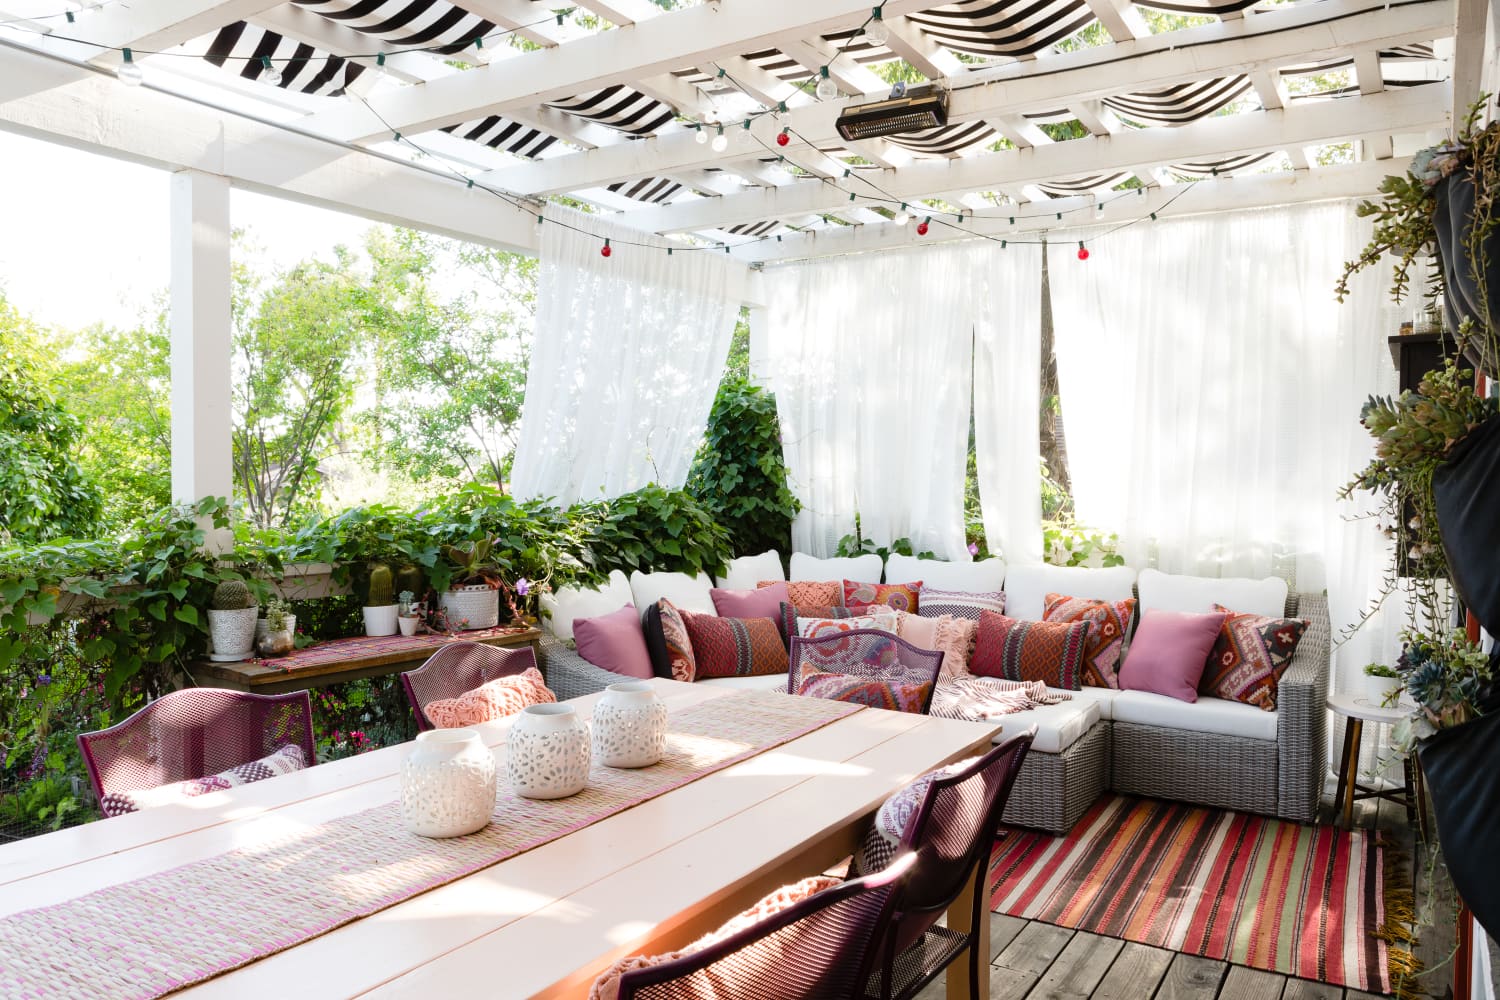 18 West Elm Outdoor Furniture Finds That’ll Turn Your Space Into an Oasis